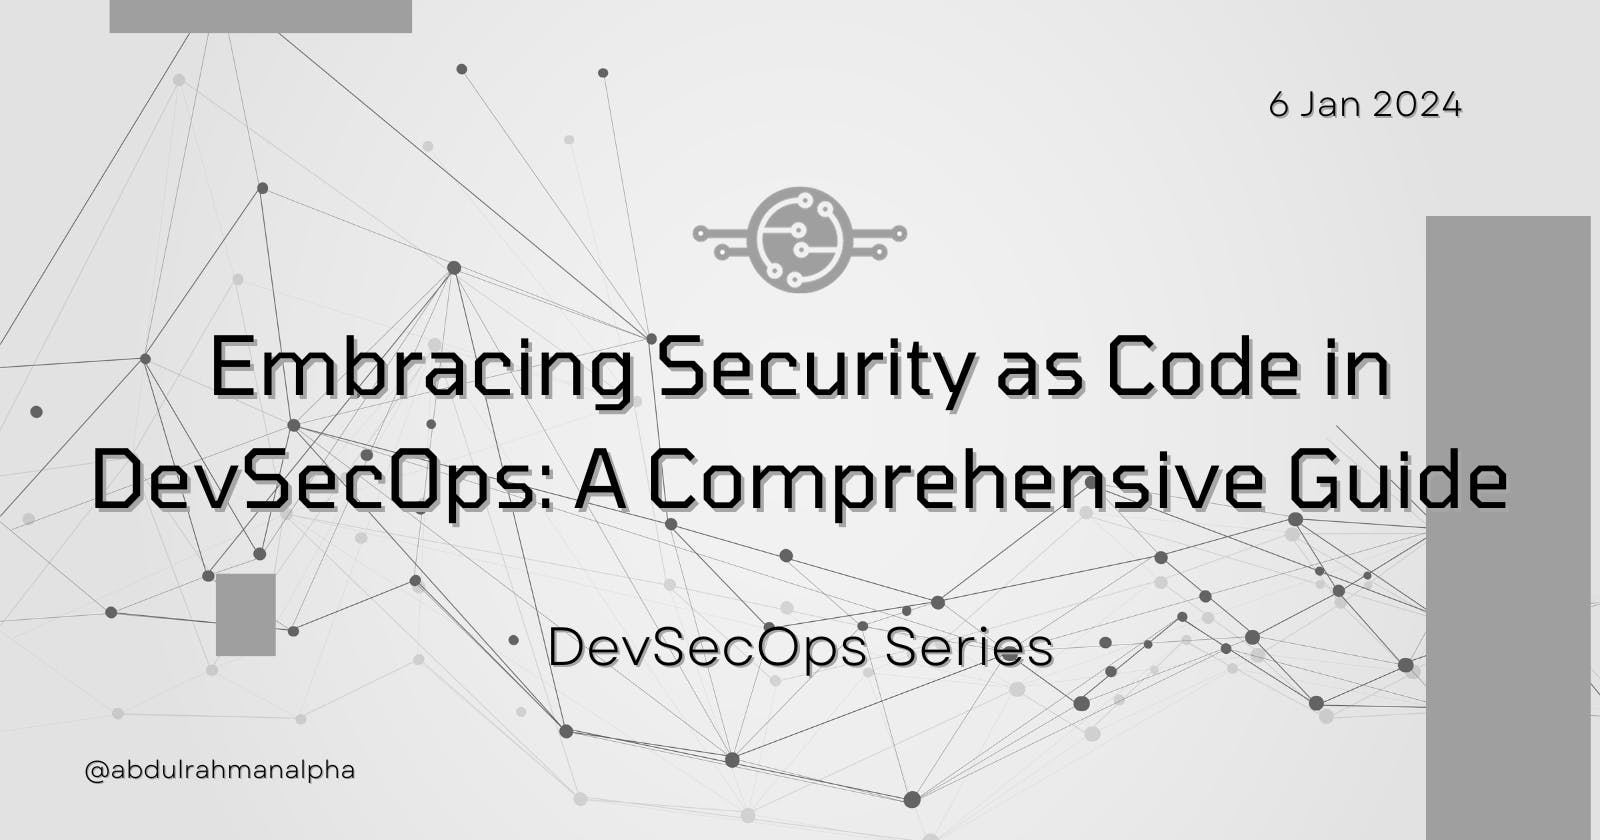 Embracing Security as Code in DevSecOps: A Comprehensive Guide